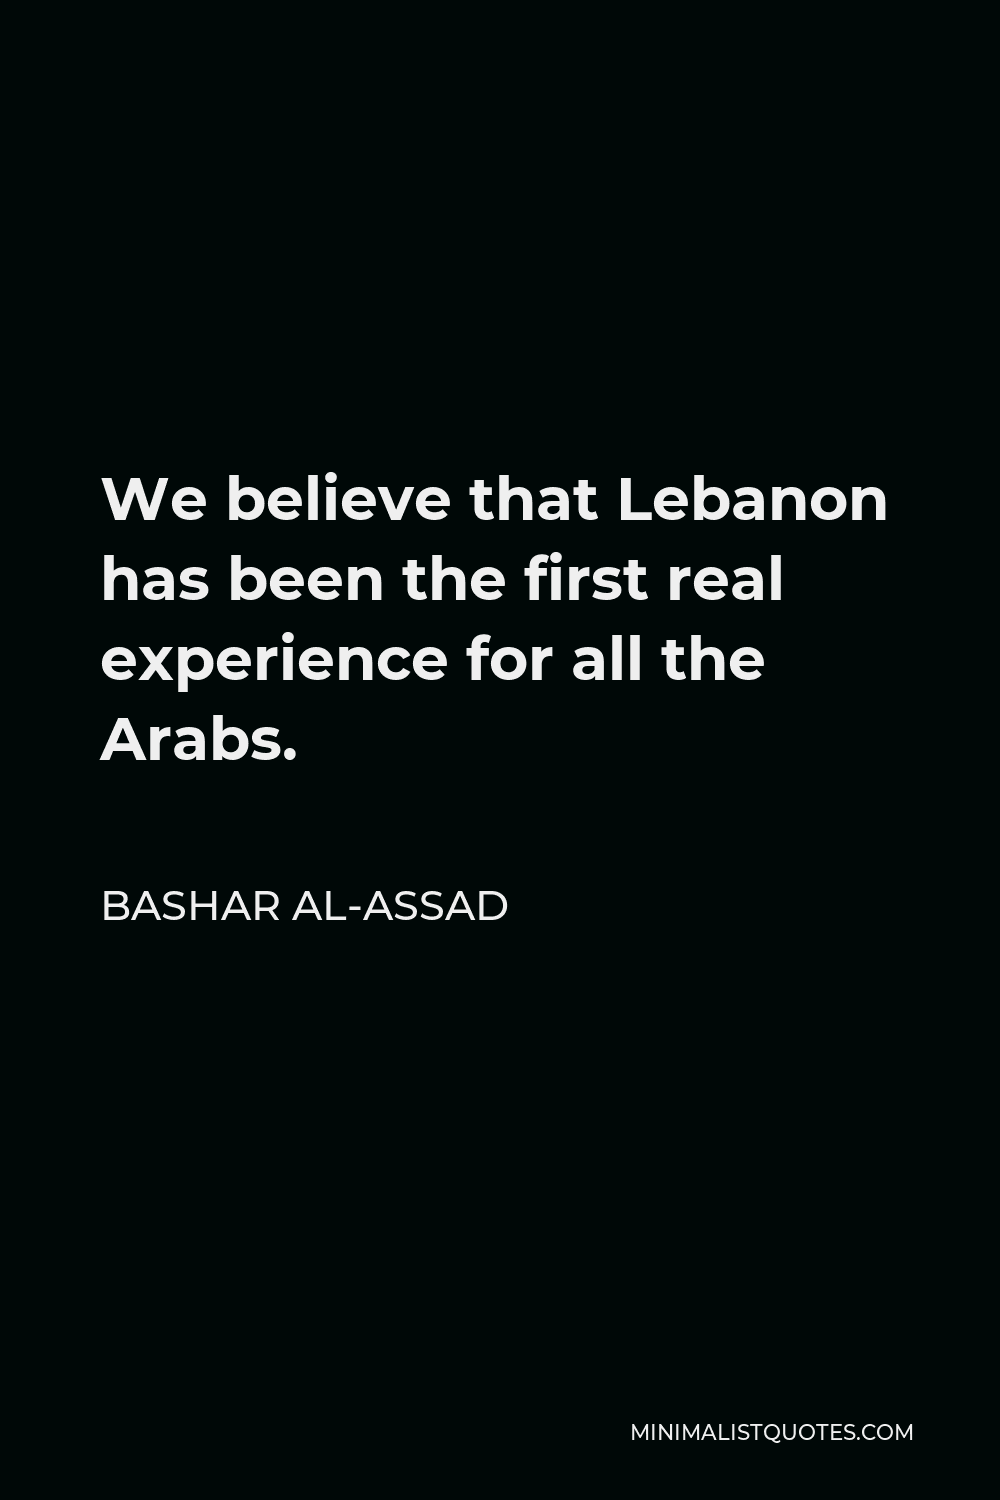 Bashar al-Assad Quote - We believe that Lebanon has been the first real experience for all the Arabs.